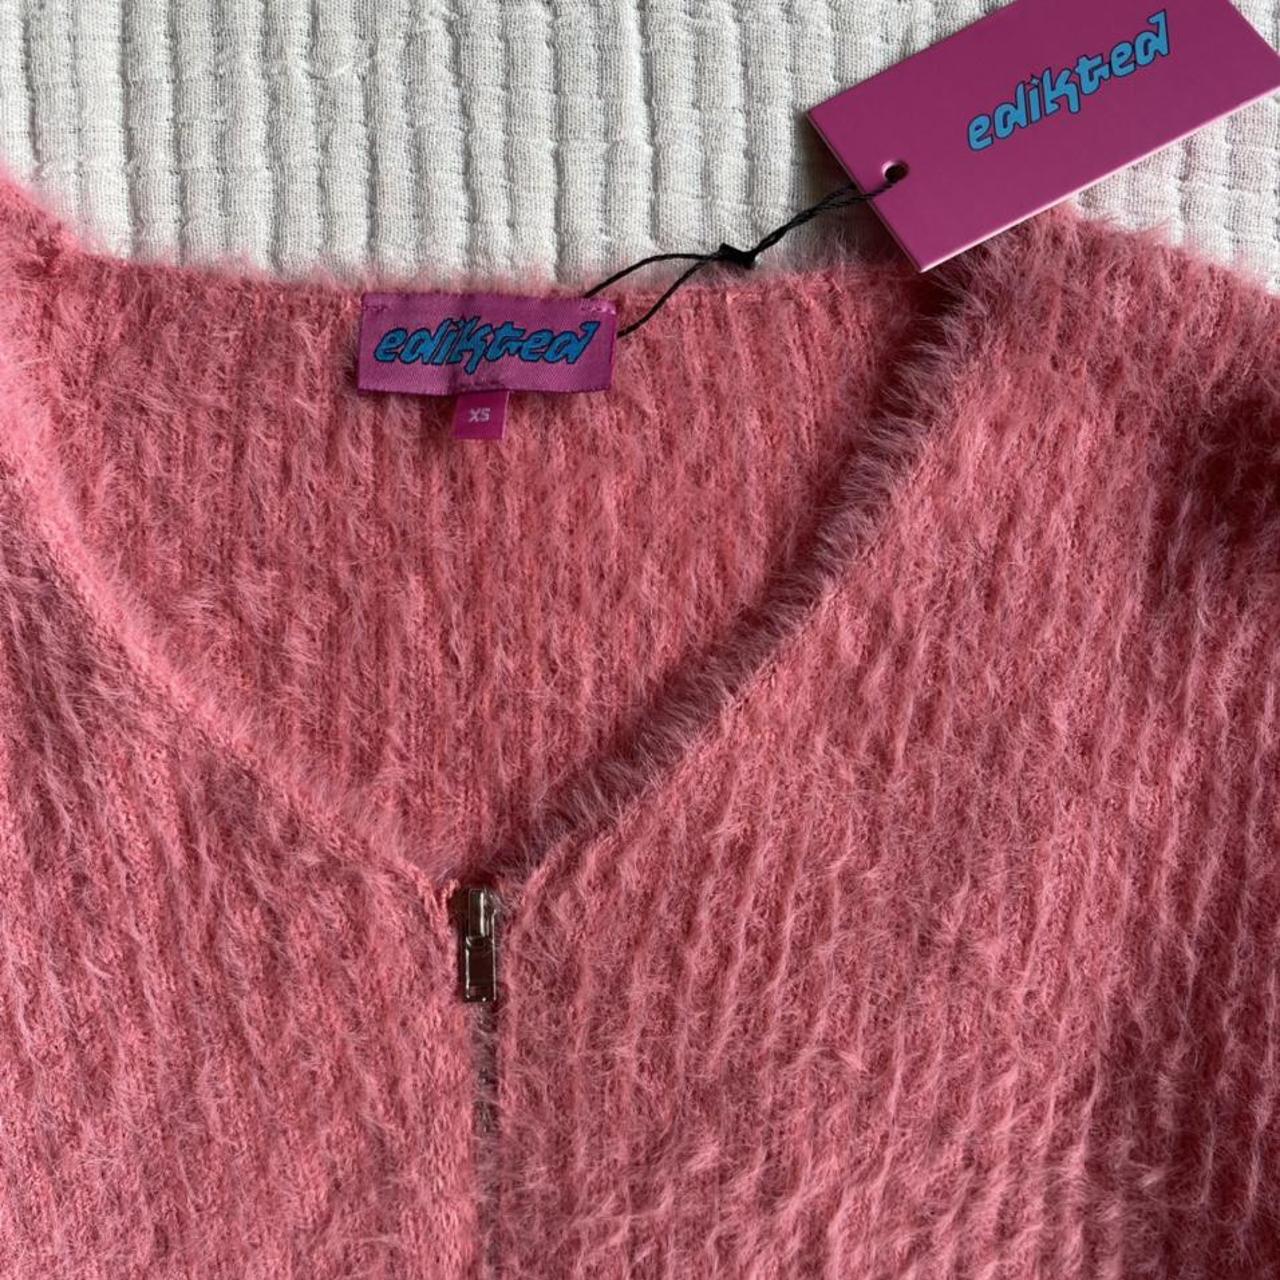 Product Image 3 - Edikted Pink Fuzzy Zip Up💓
So